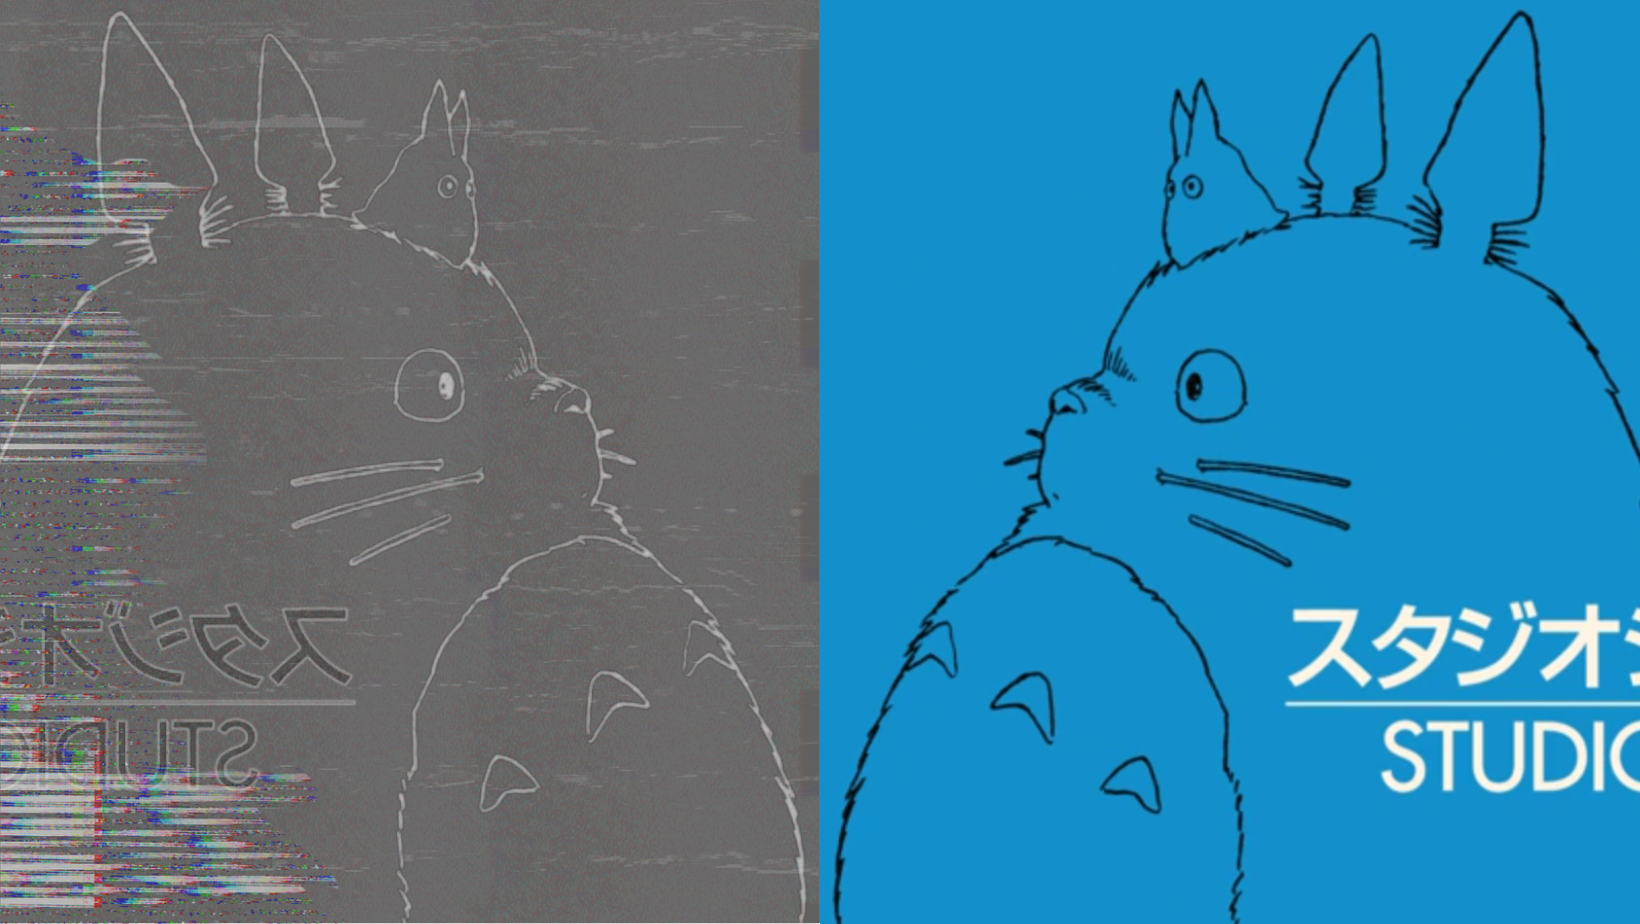 Can You Guess the Ghibli Movie Based on Its Alternate Title? (easy)